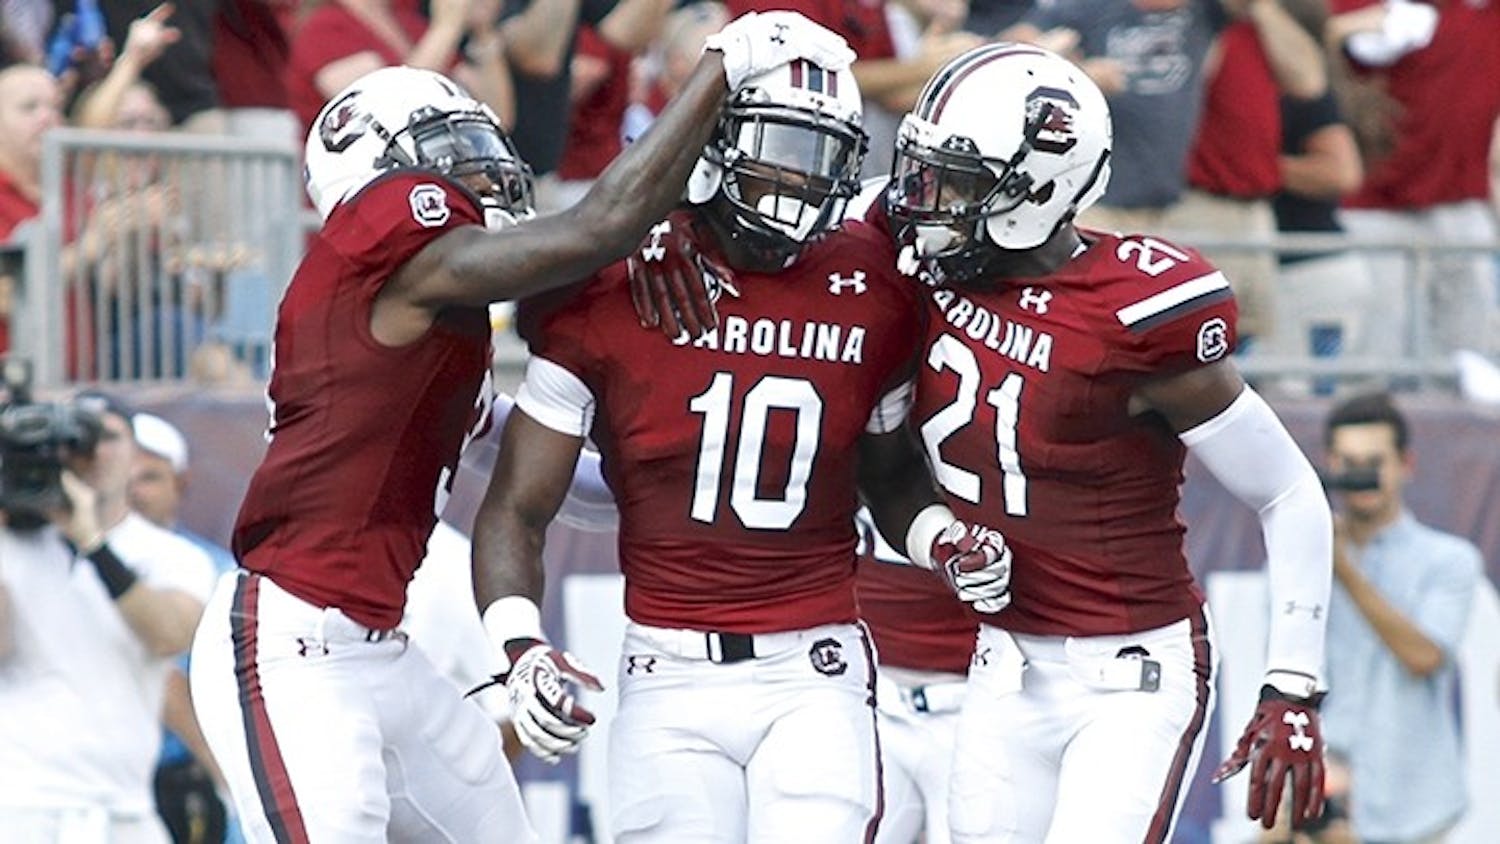 Coming off a disappointing 3-9 campaign, the South Carolina football team will set out to prove the critics wrong week after week in 2016.